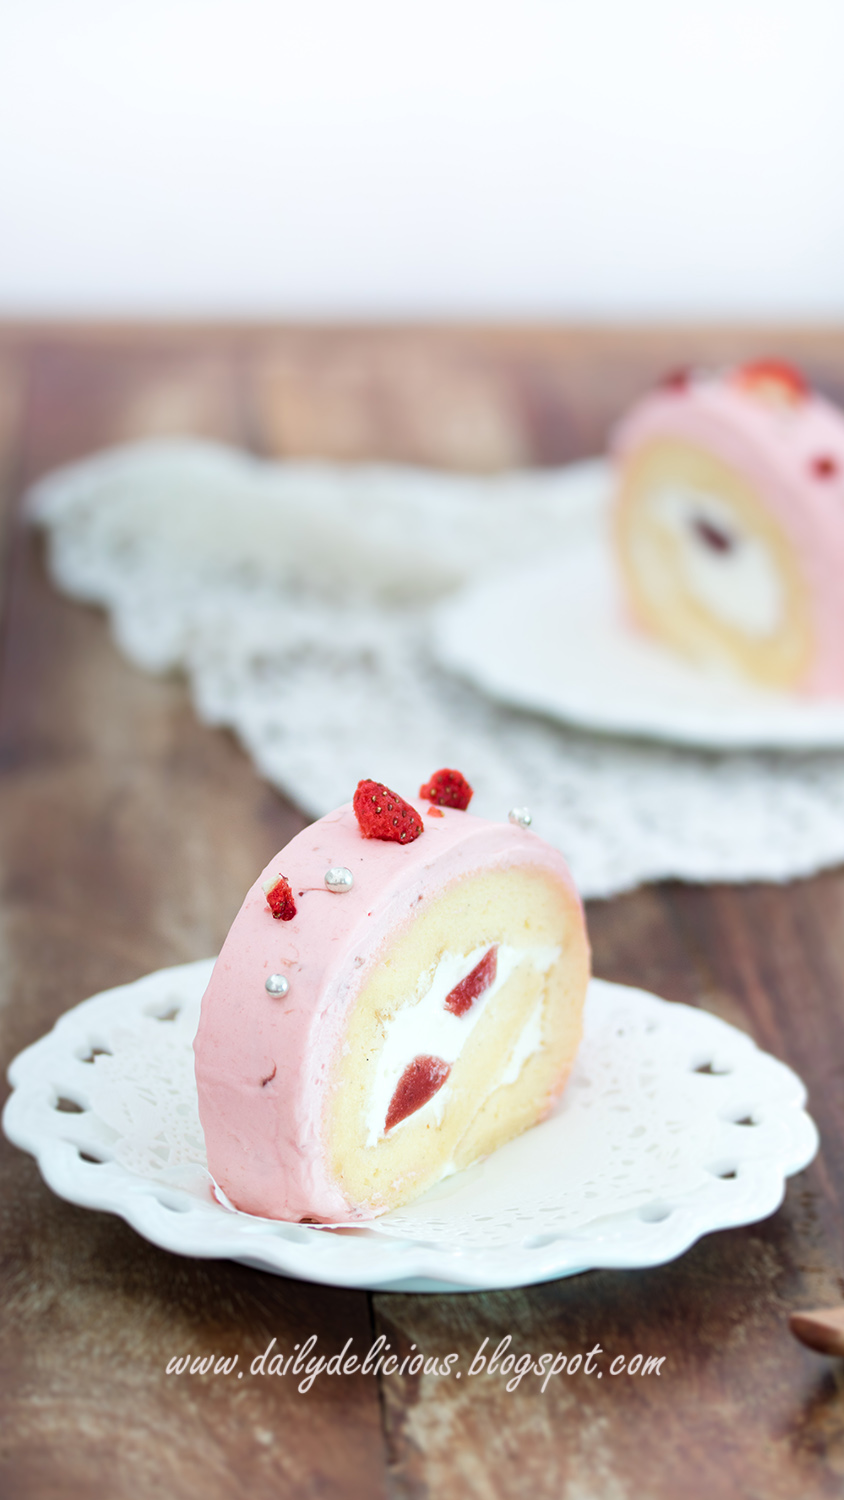 dailydelicious: Strawberry Jelly Roll: Pinky, cutie roll